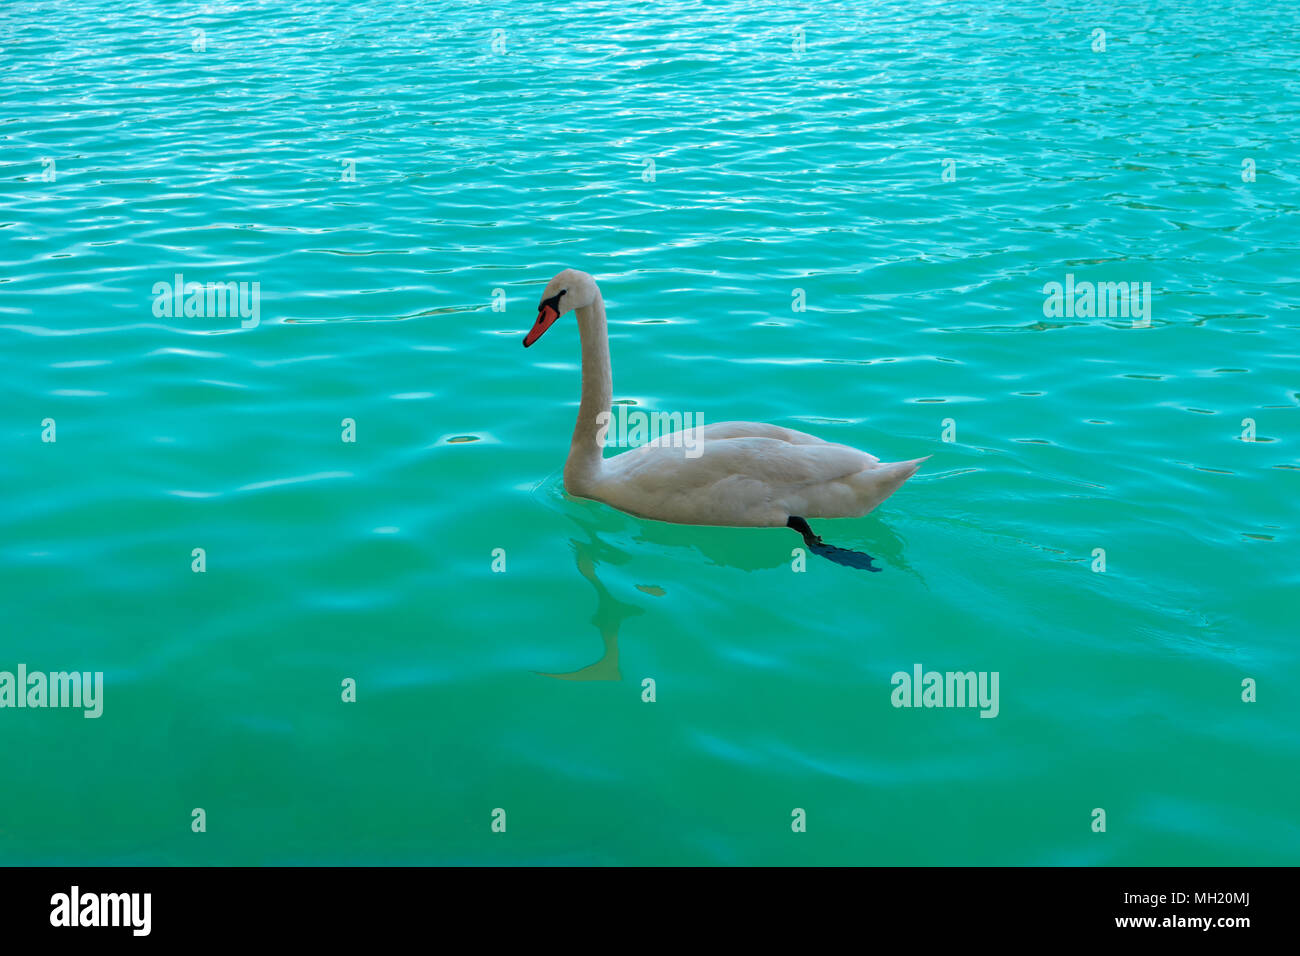 Beautiful white swan swimming in Bled lake Slovenia, Europe. Romantic landscape. Cygnus. Profile of White Mute Swan on clear turquoise water of blue l Stock Photo